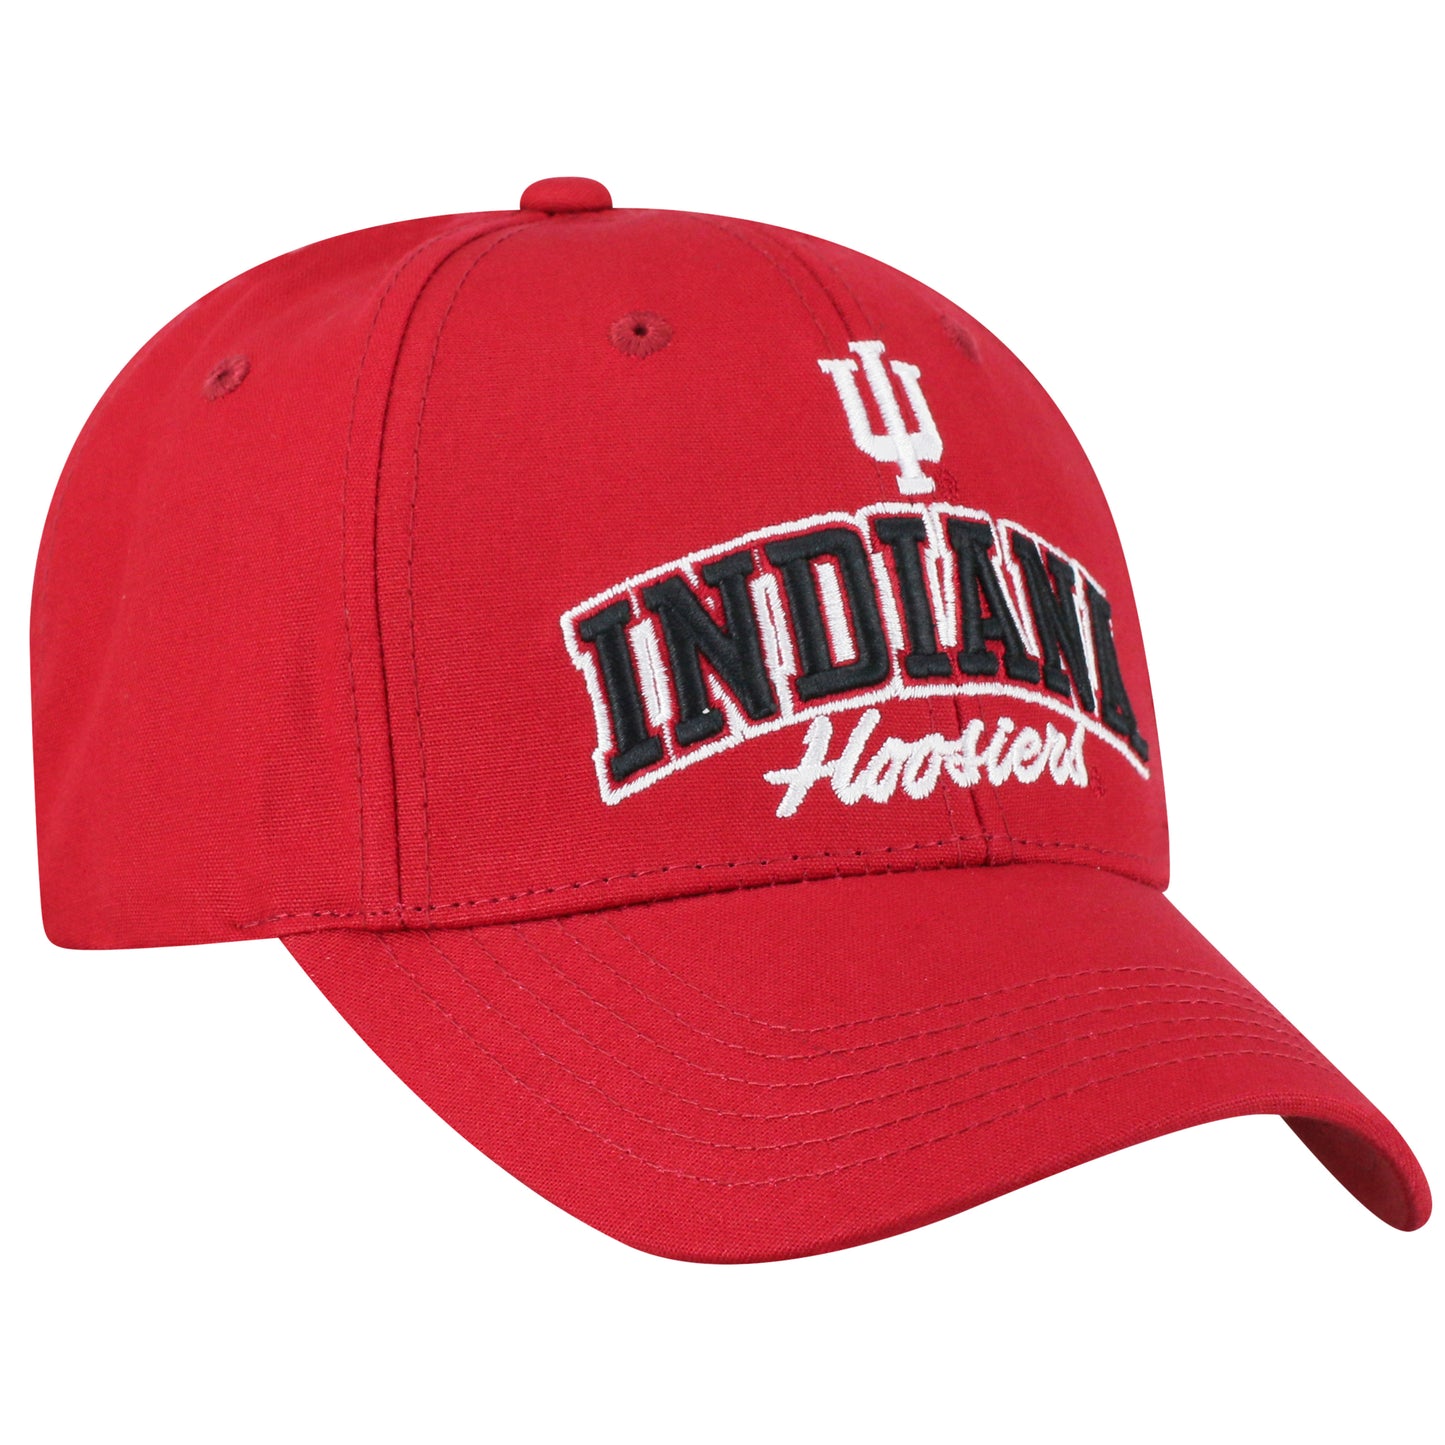 Mens Indiana Hoosiers Advisor Adjustable Hat By Top Of The World